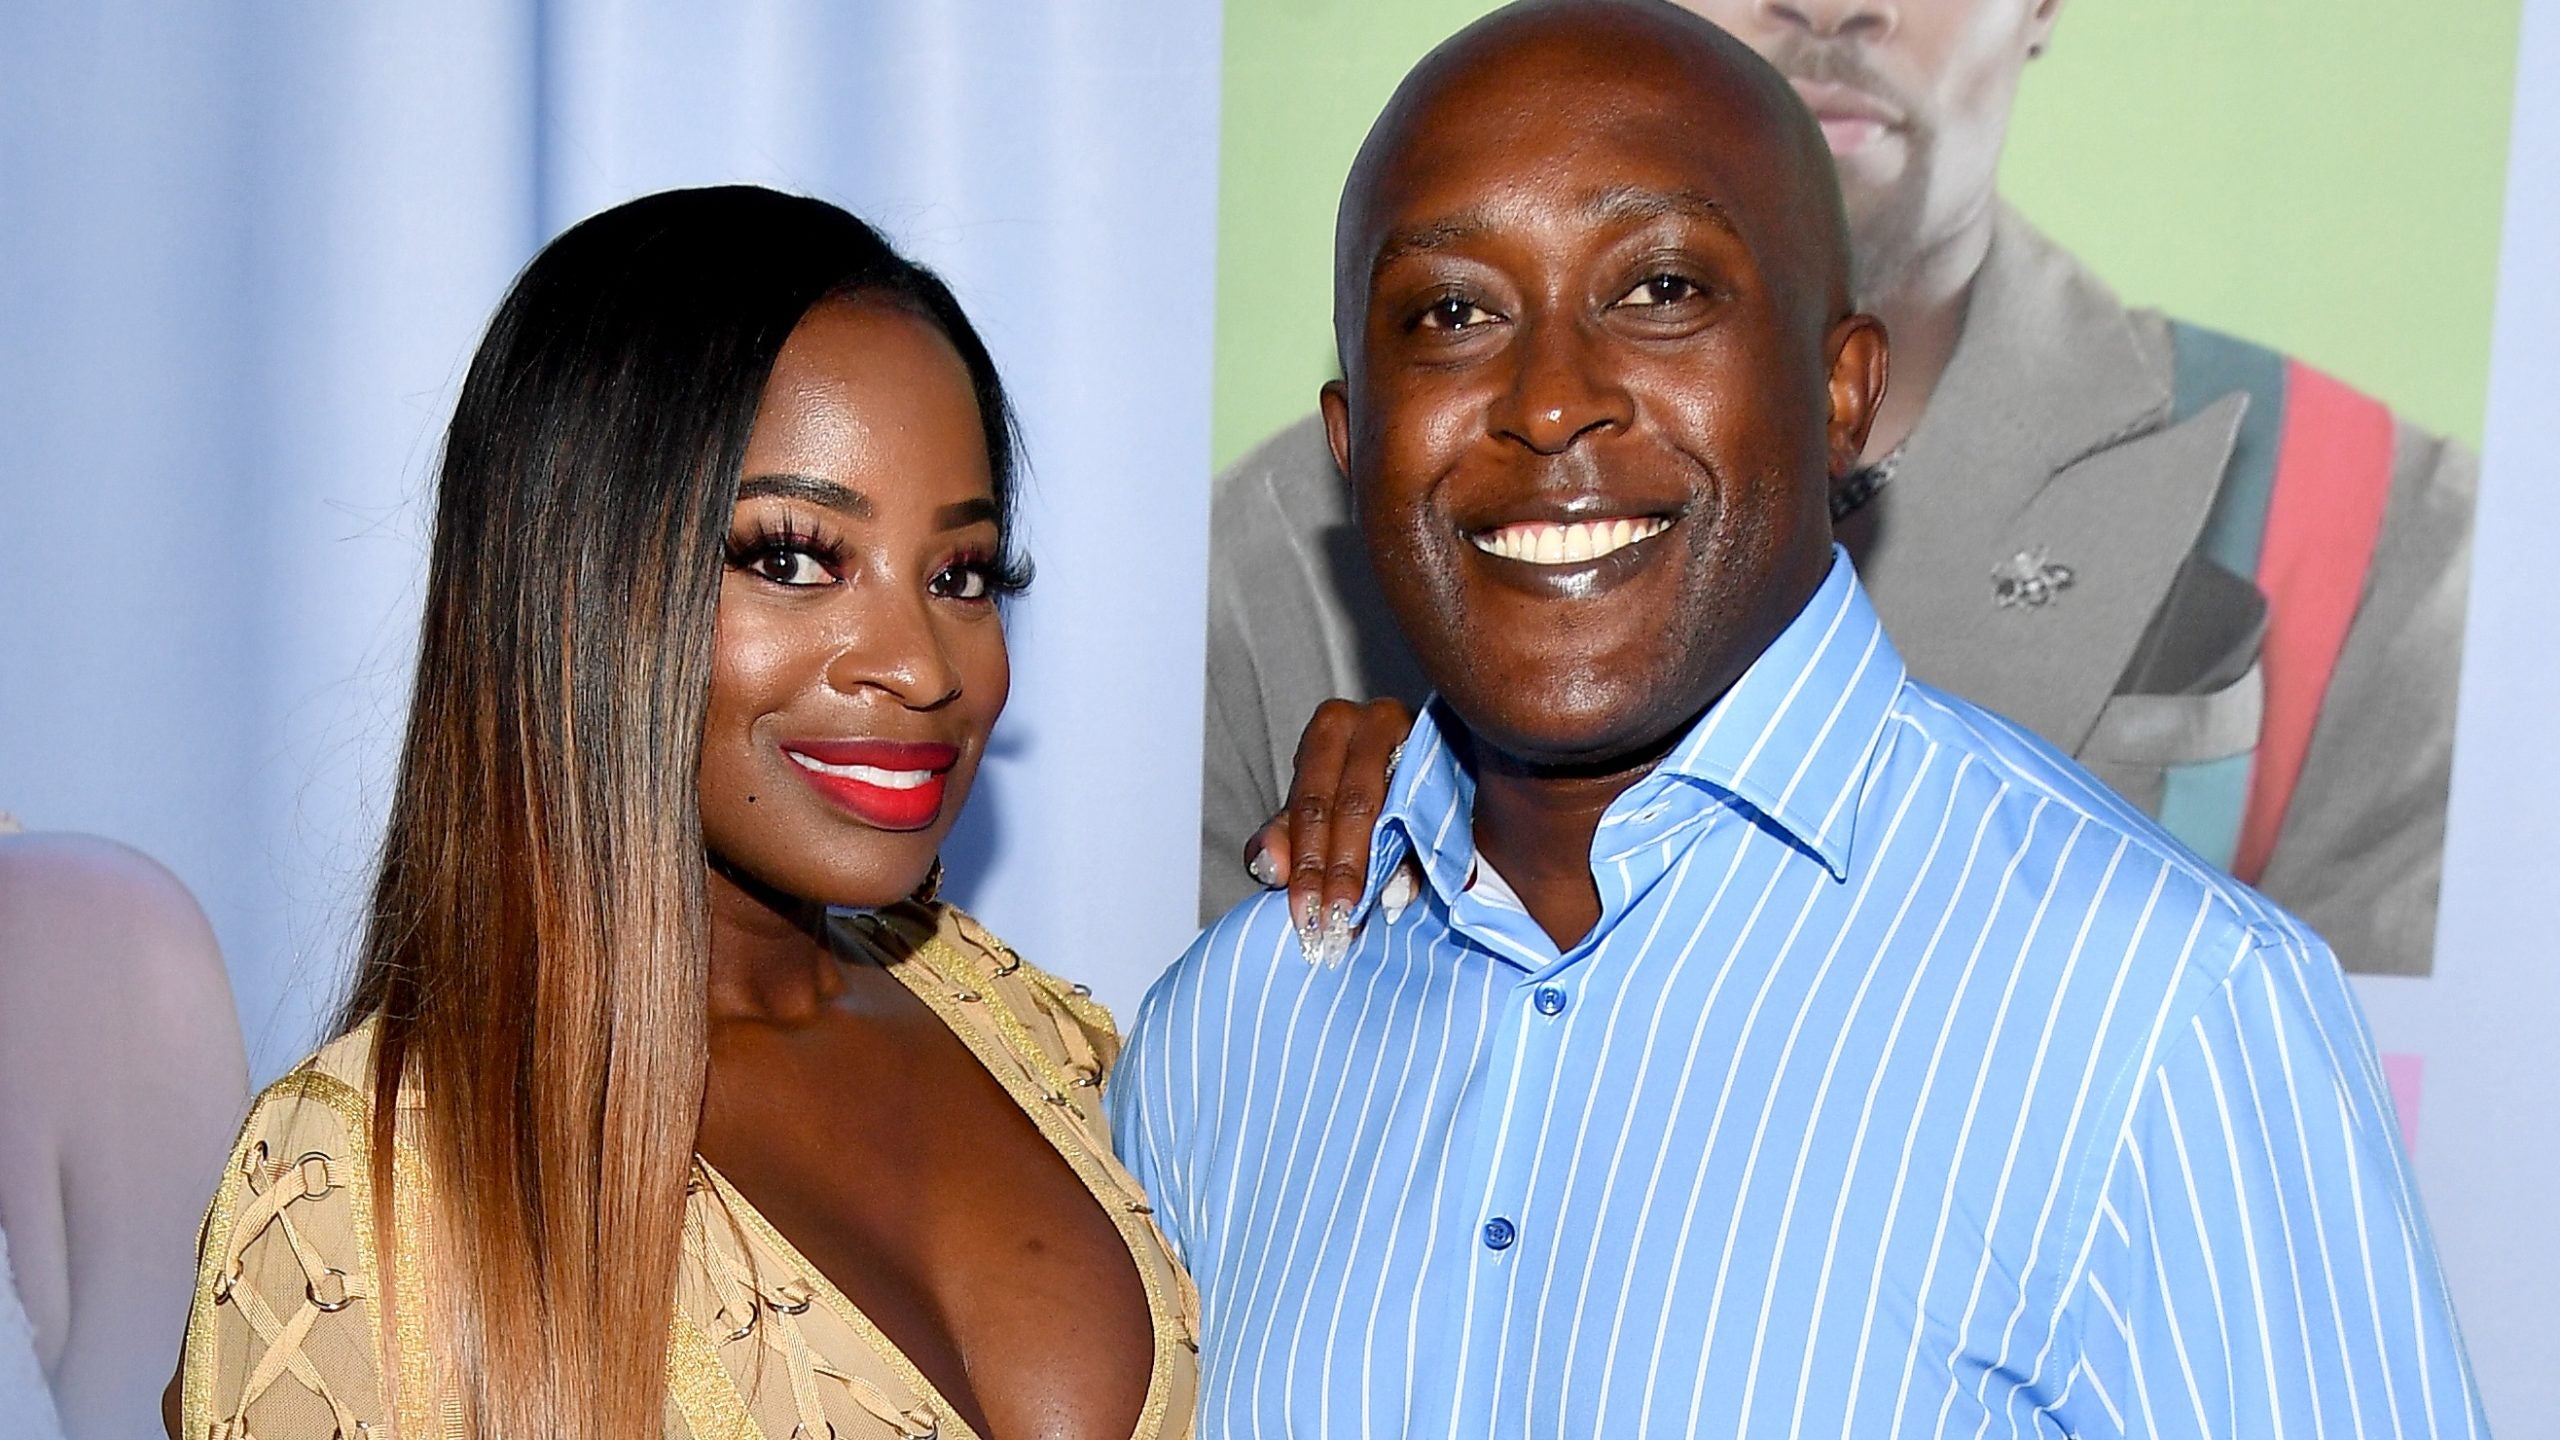 RHOA’s Shamea Morton And Her Husband Are Expecting Their Second Child